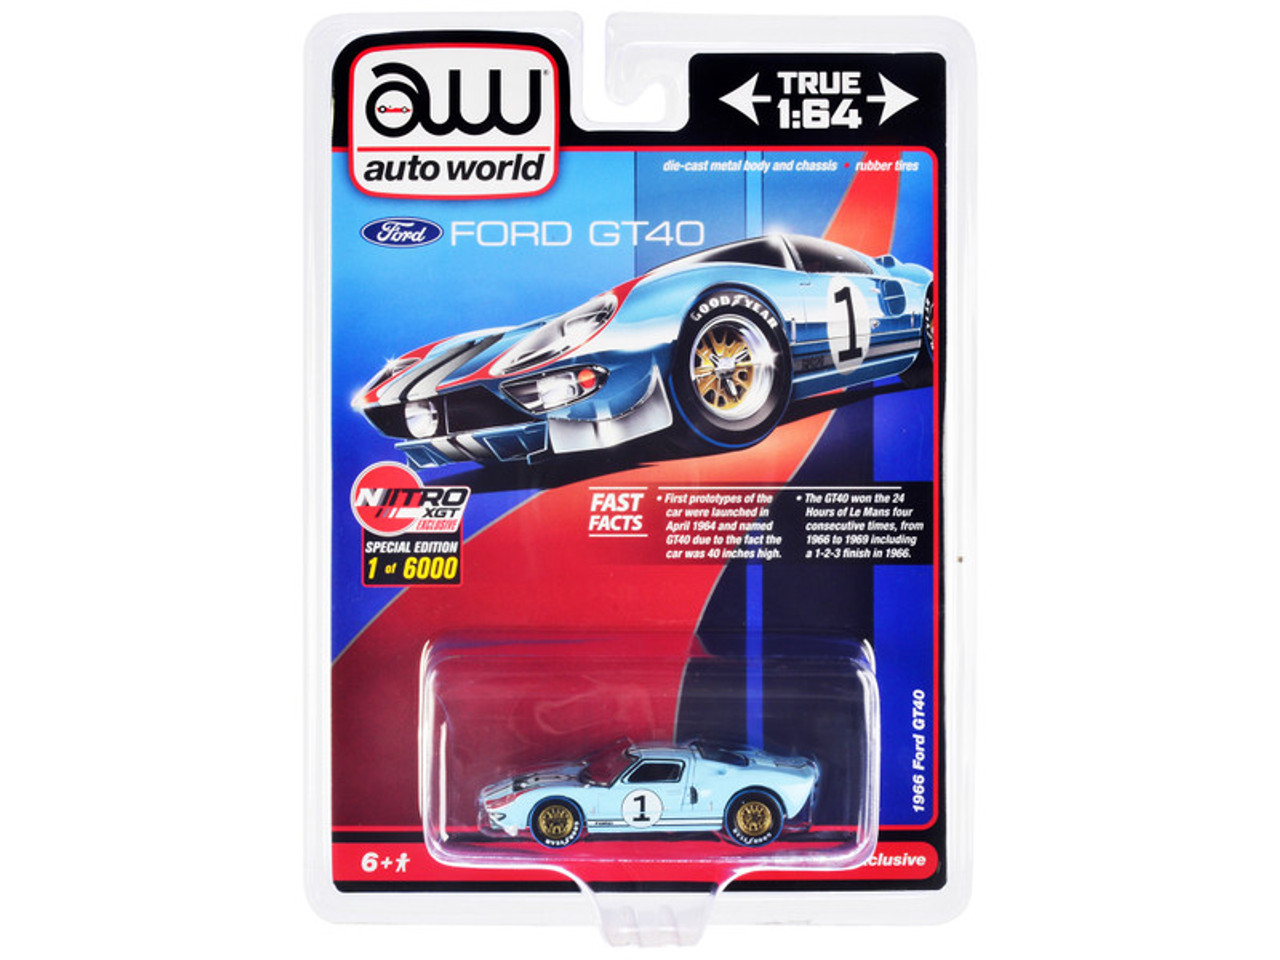 1/64 Auto World 1966 Ford GT40 RHD (Right Hand Drive) #1 Light Blue with Stripes Limited Edition Diecast Car Model